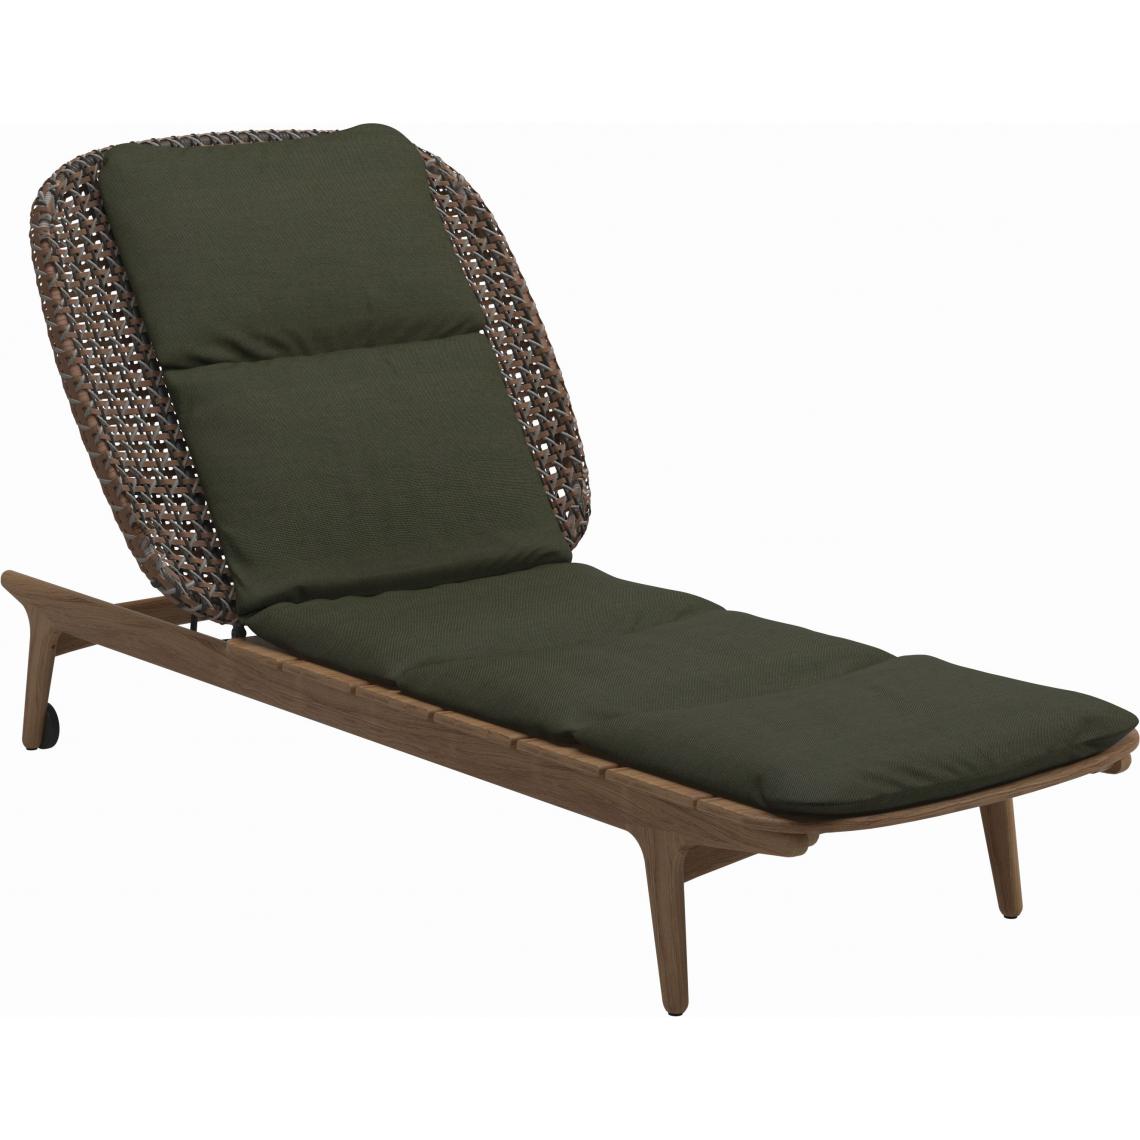 Gloster - Couchette Kay - Fife Olive - GlosterBrindleWicker - Chaises de jardin